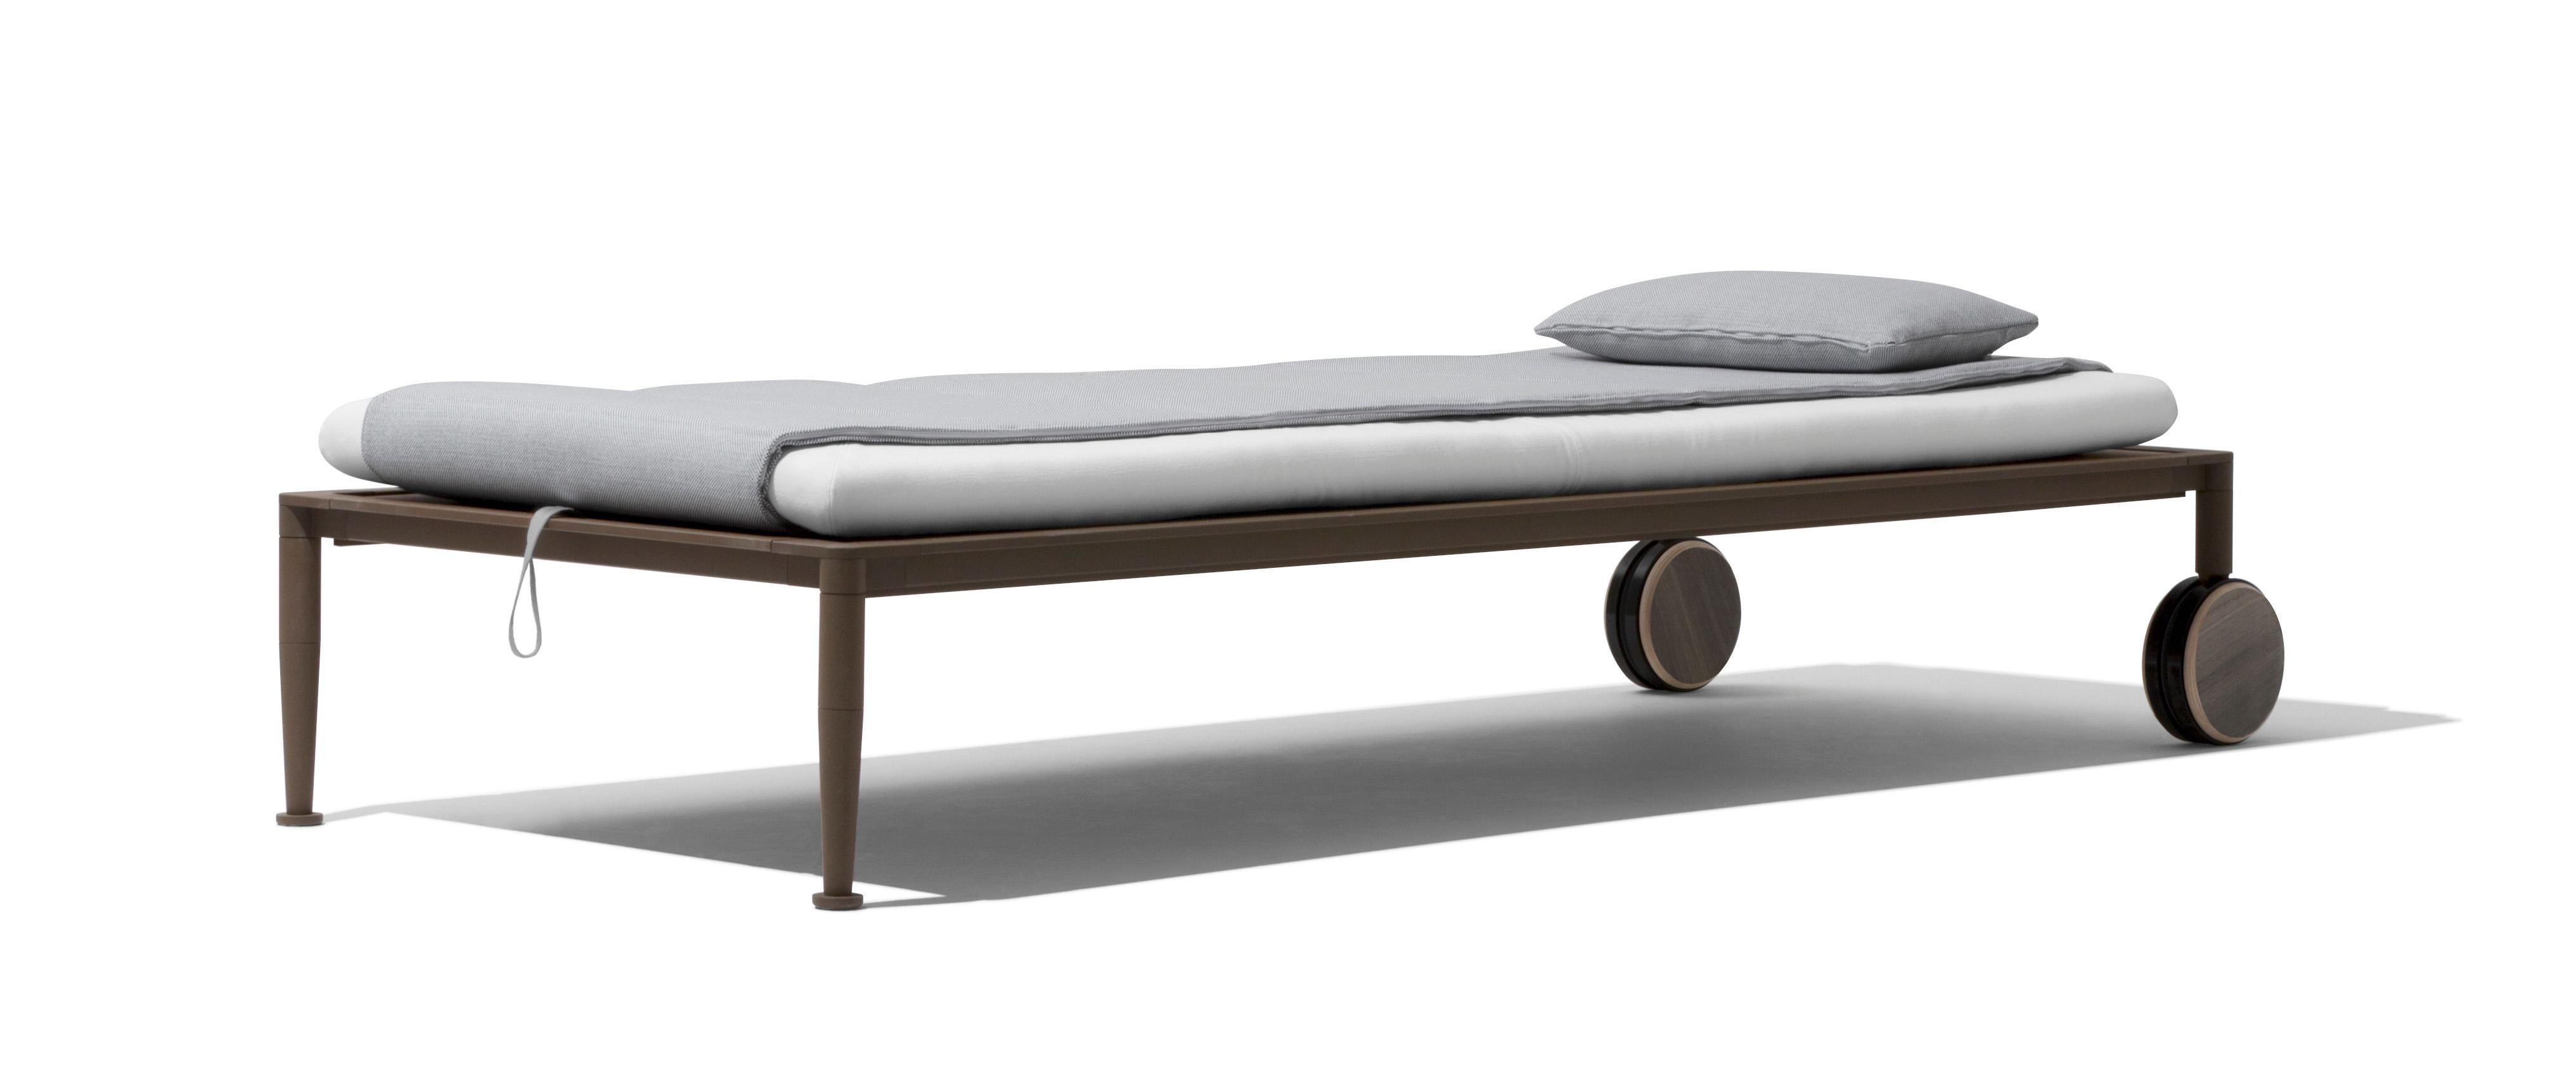 Gea Beach Lounger designed by Chi Wing Lo
Ajustable Chaise lounge with sophisticated manual mechanism enables the incline of the back and footrest to be adjusted, offering a piece of furniture that provides an almost personalised solution to